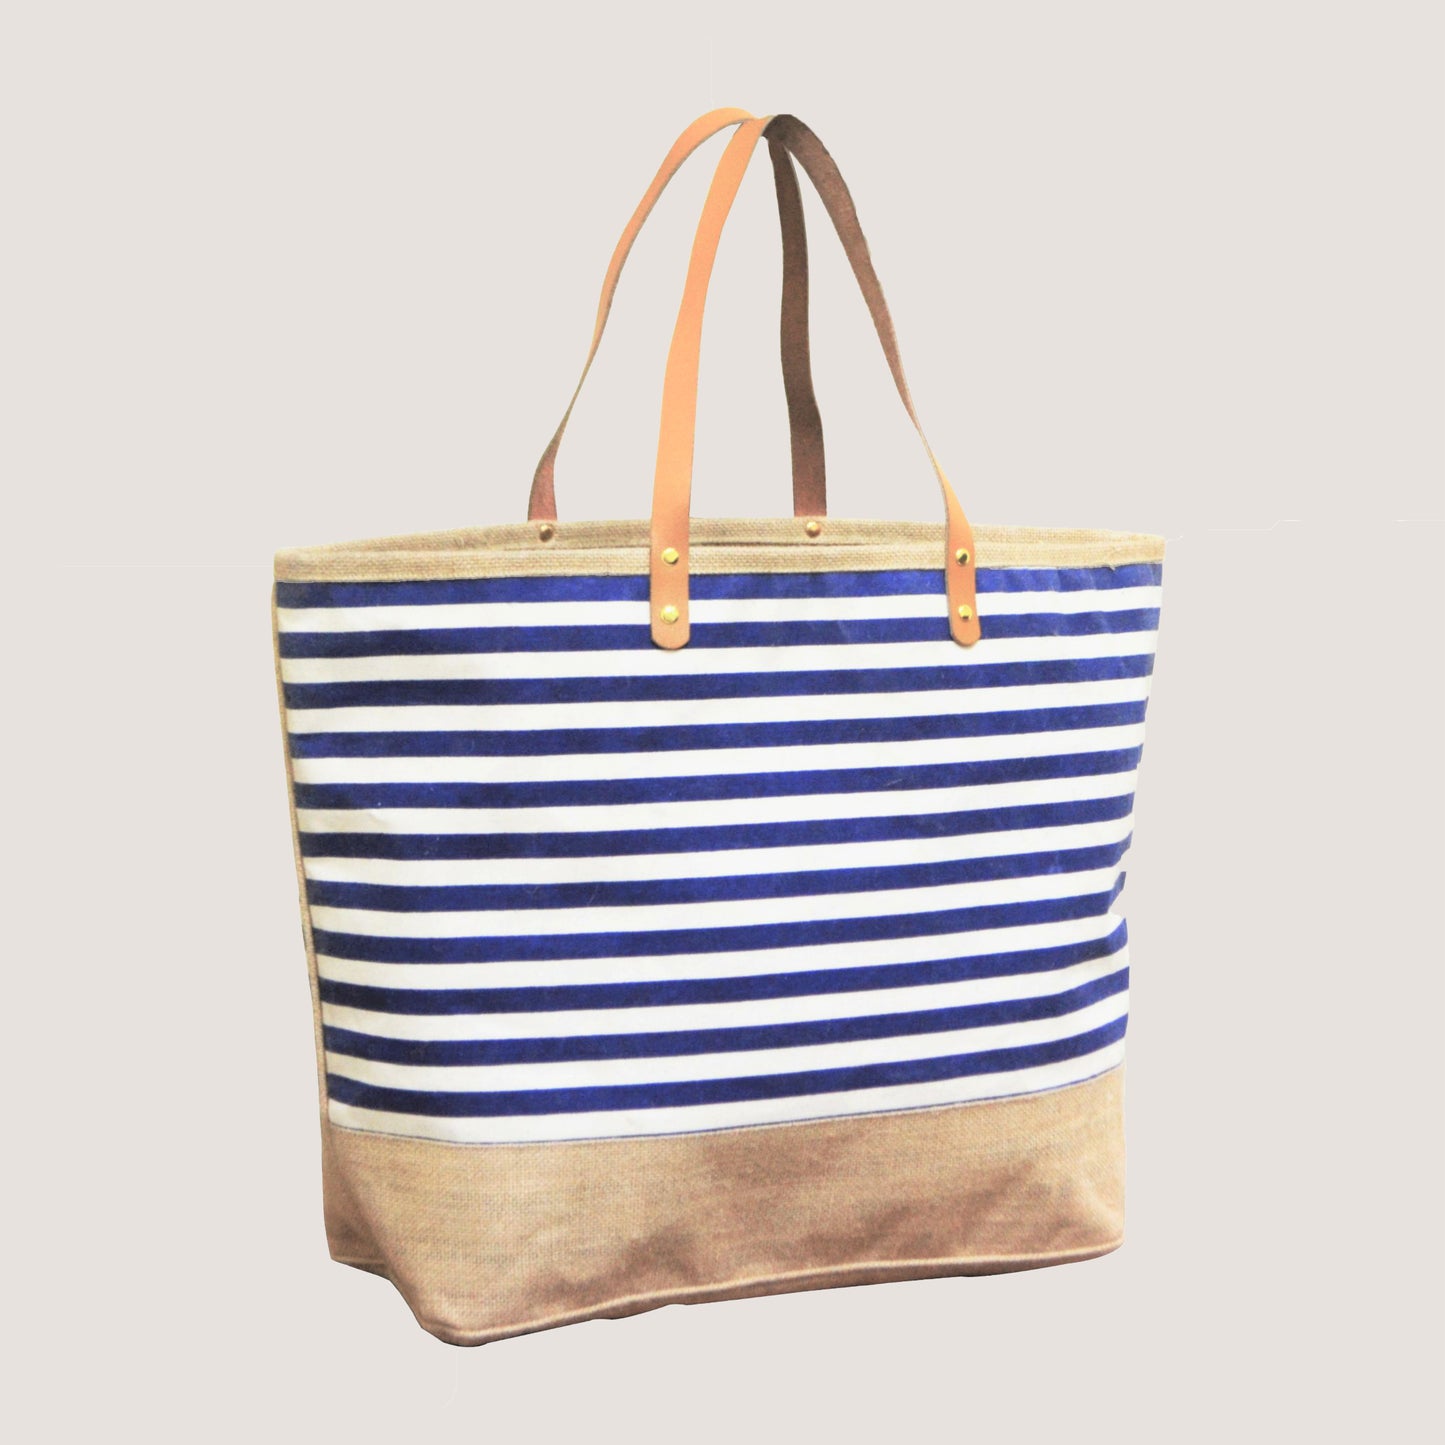 EARTHBAGS STRIPER CANVAS TOTE WITH ZIPPER